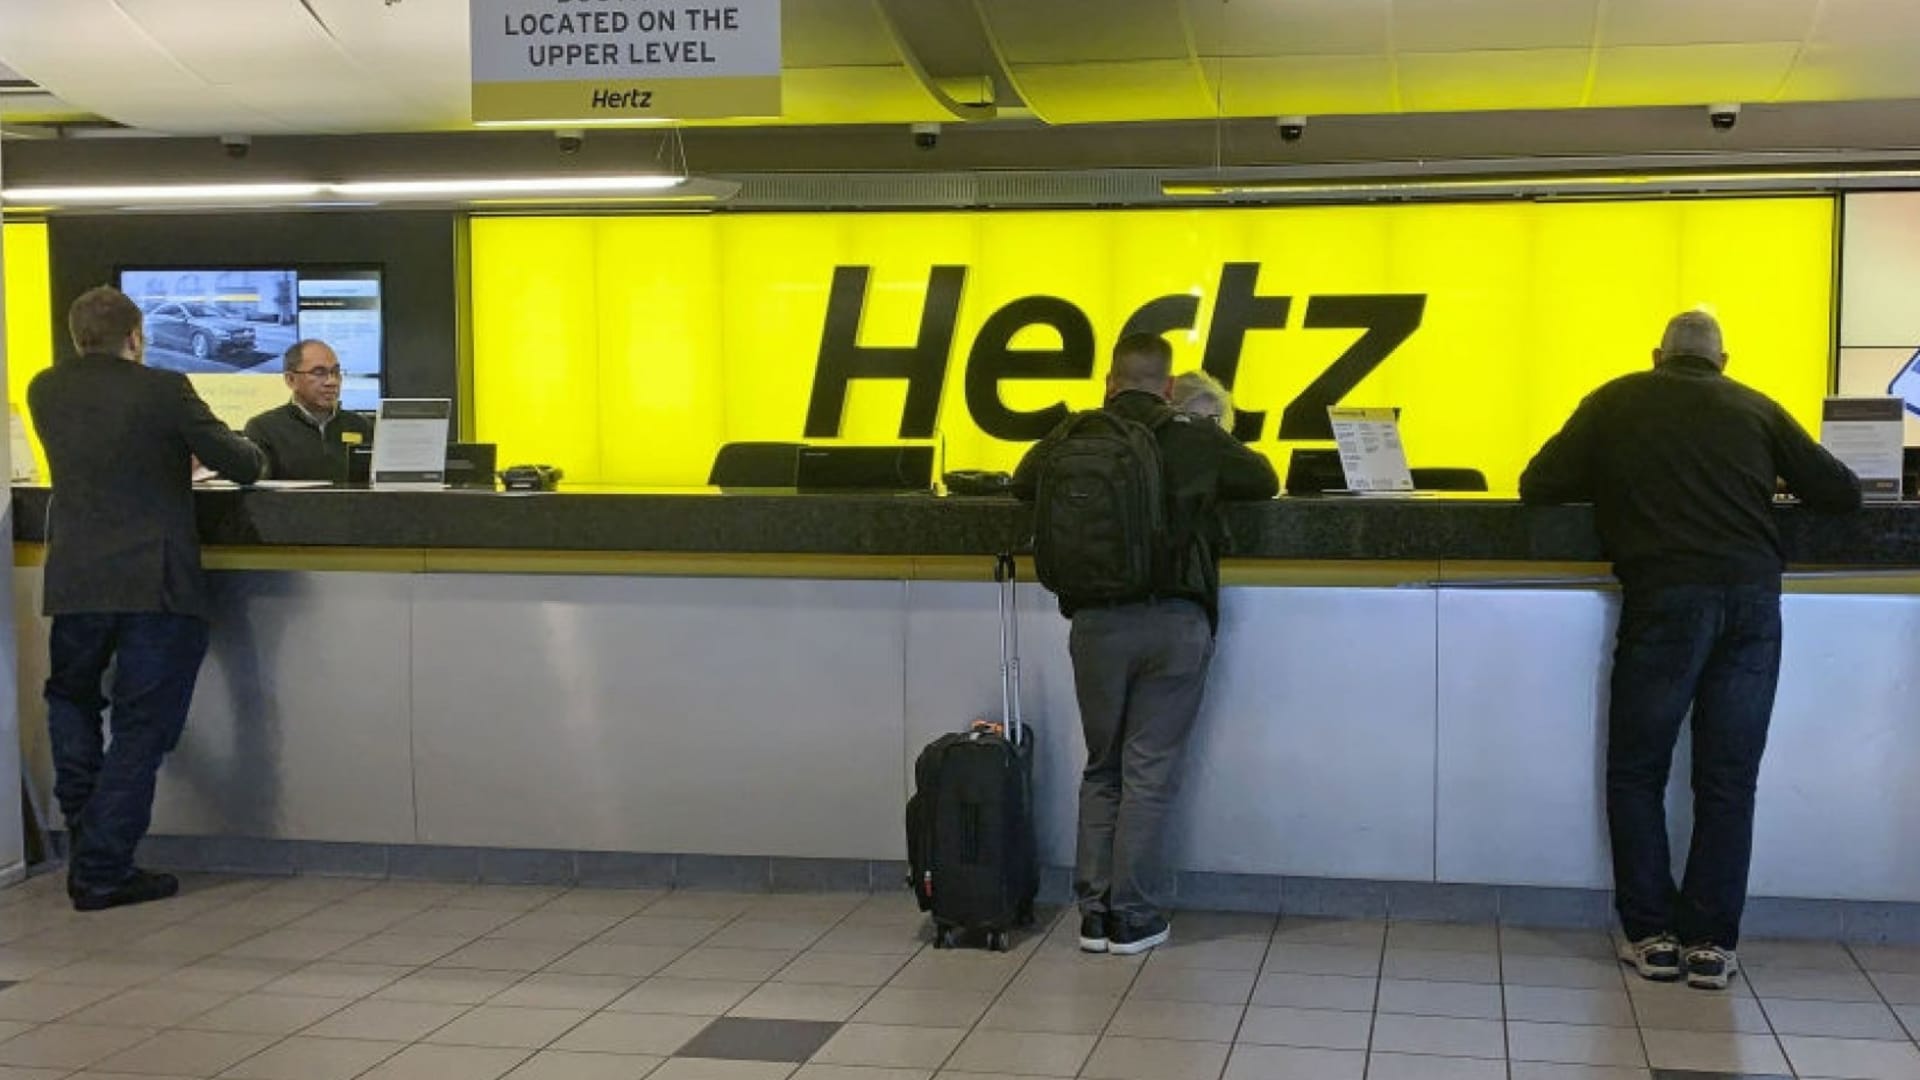 A Hertz Rental Nightmare Went Viral on Twitter. It Shows Everything Wrong With How Companies Think About Their Customers